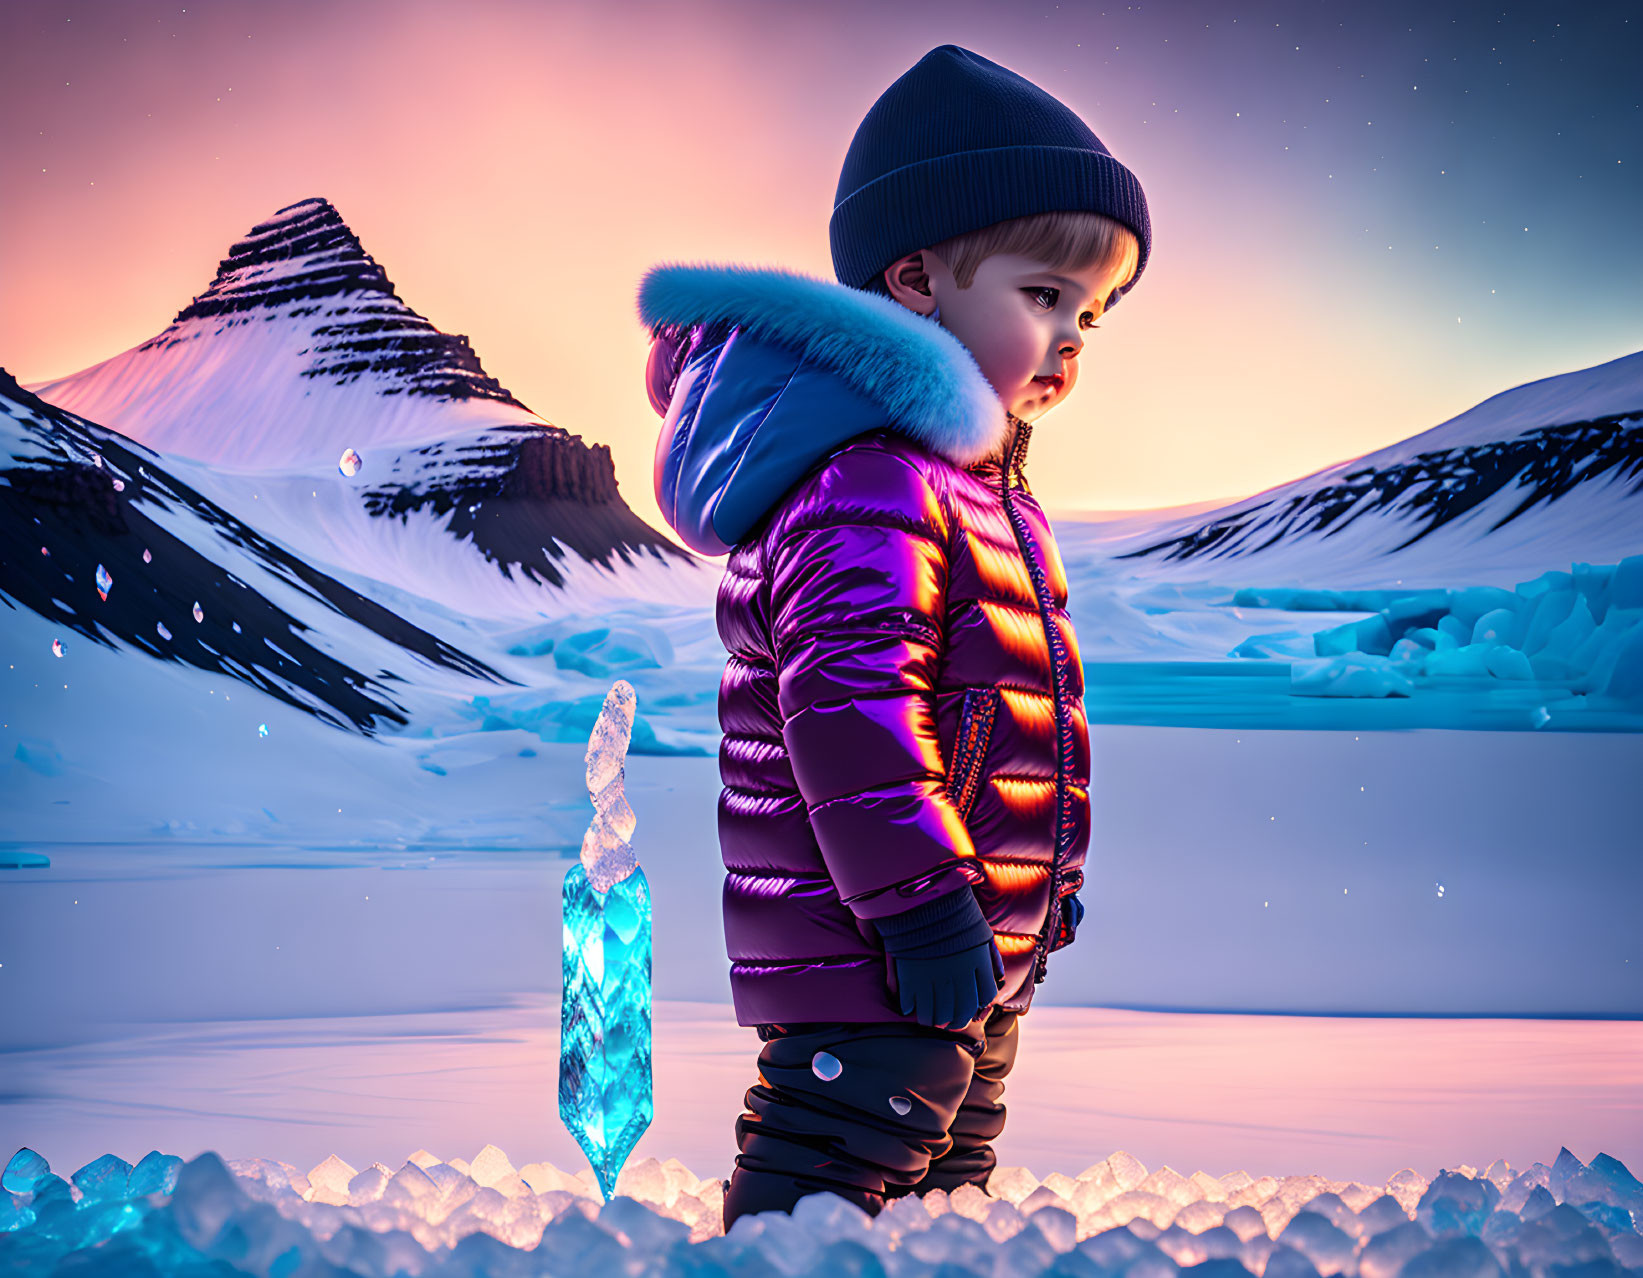 Child in Purple Jacket Surrounded by Ice Crystals and Snowy Mountains at Twilight